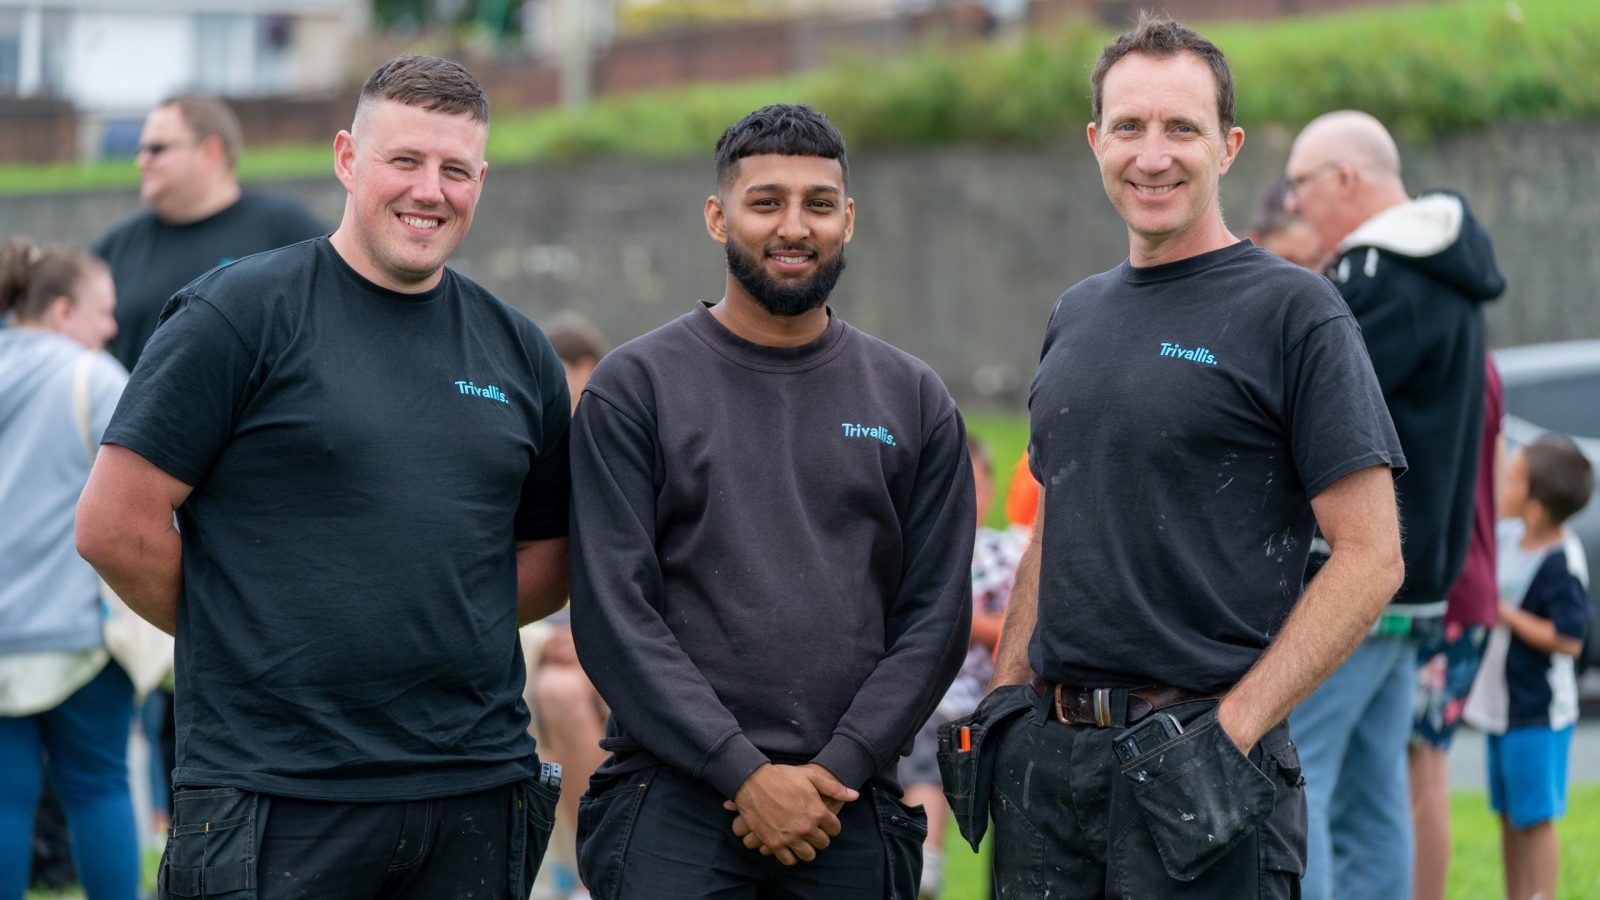 Three smiling men in black work shirts and trousers standing together outdoors.